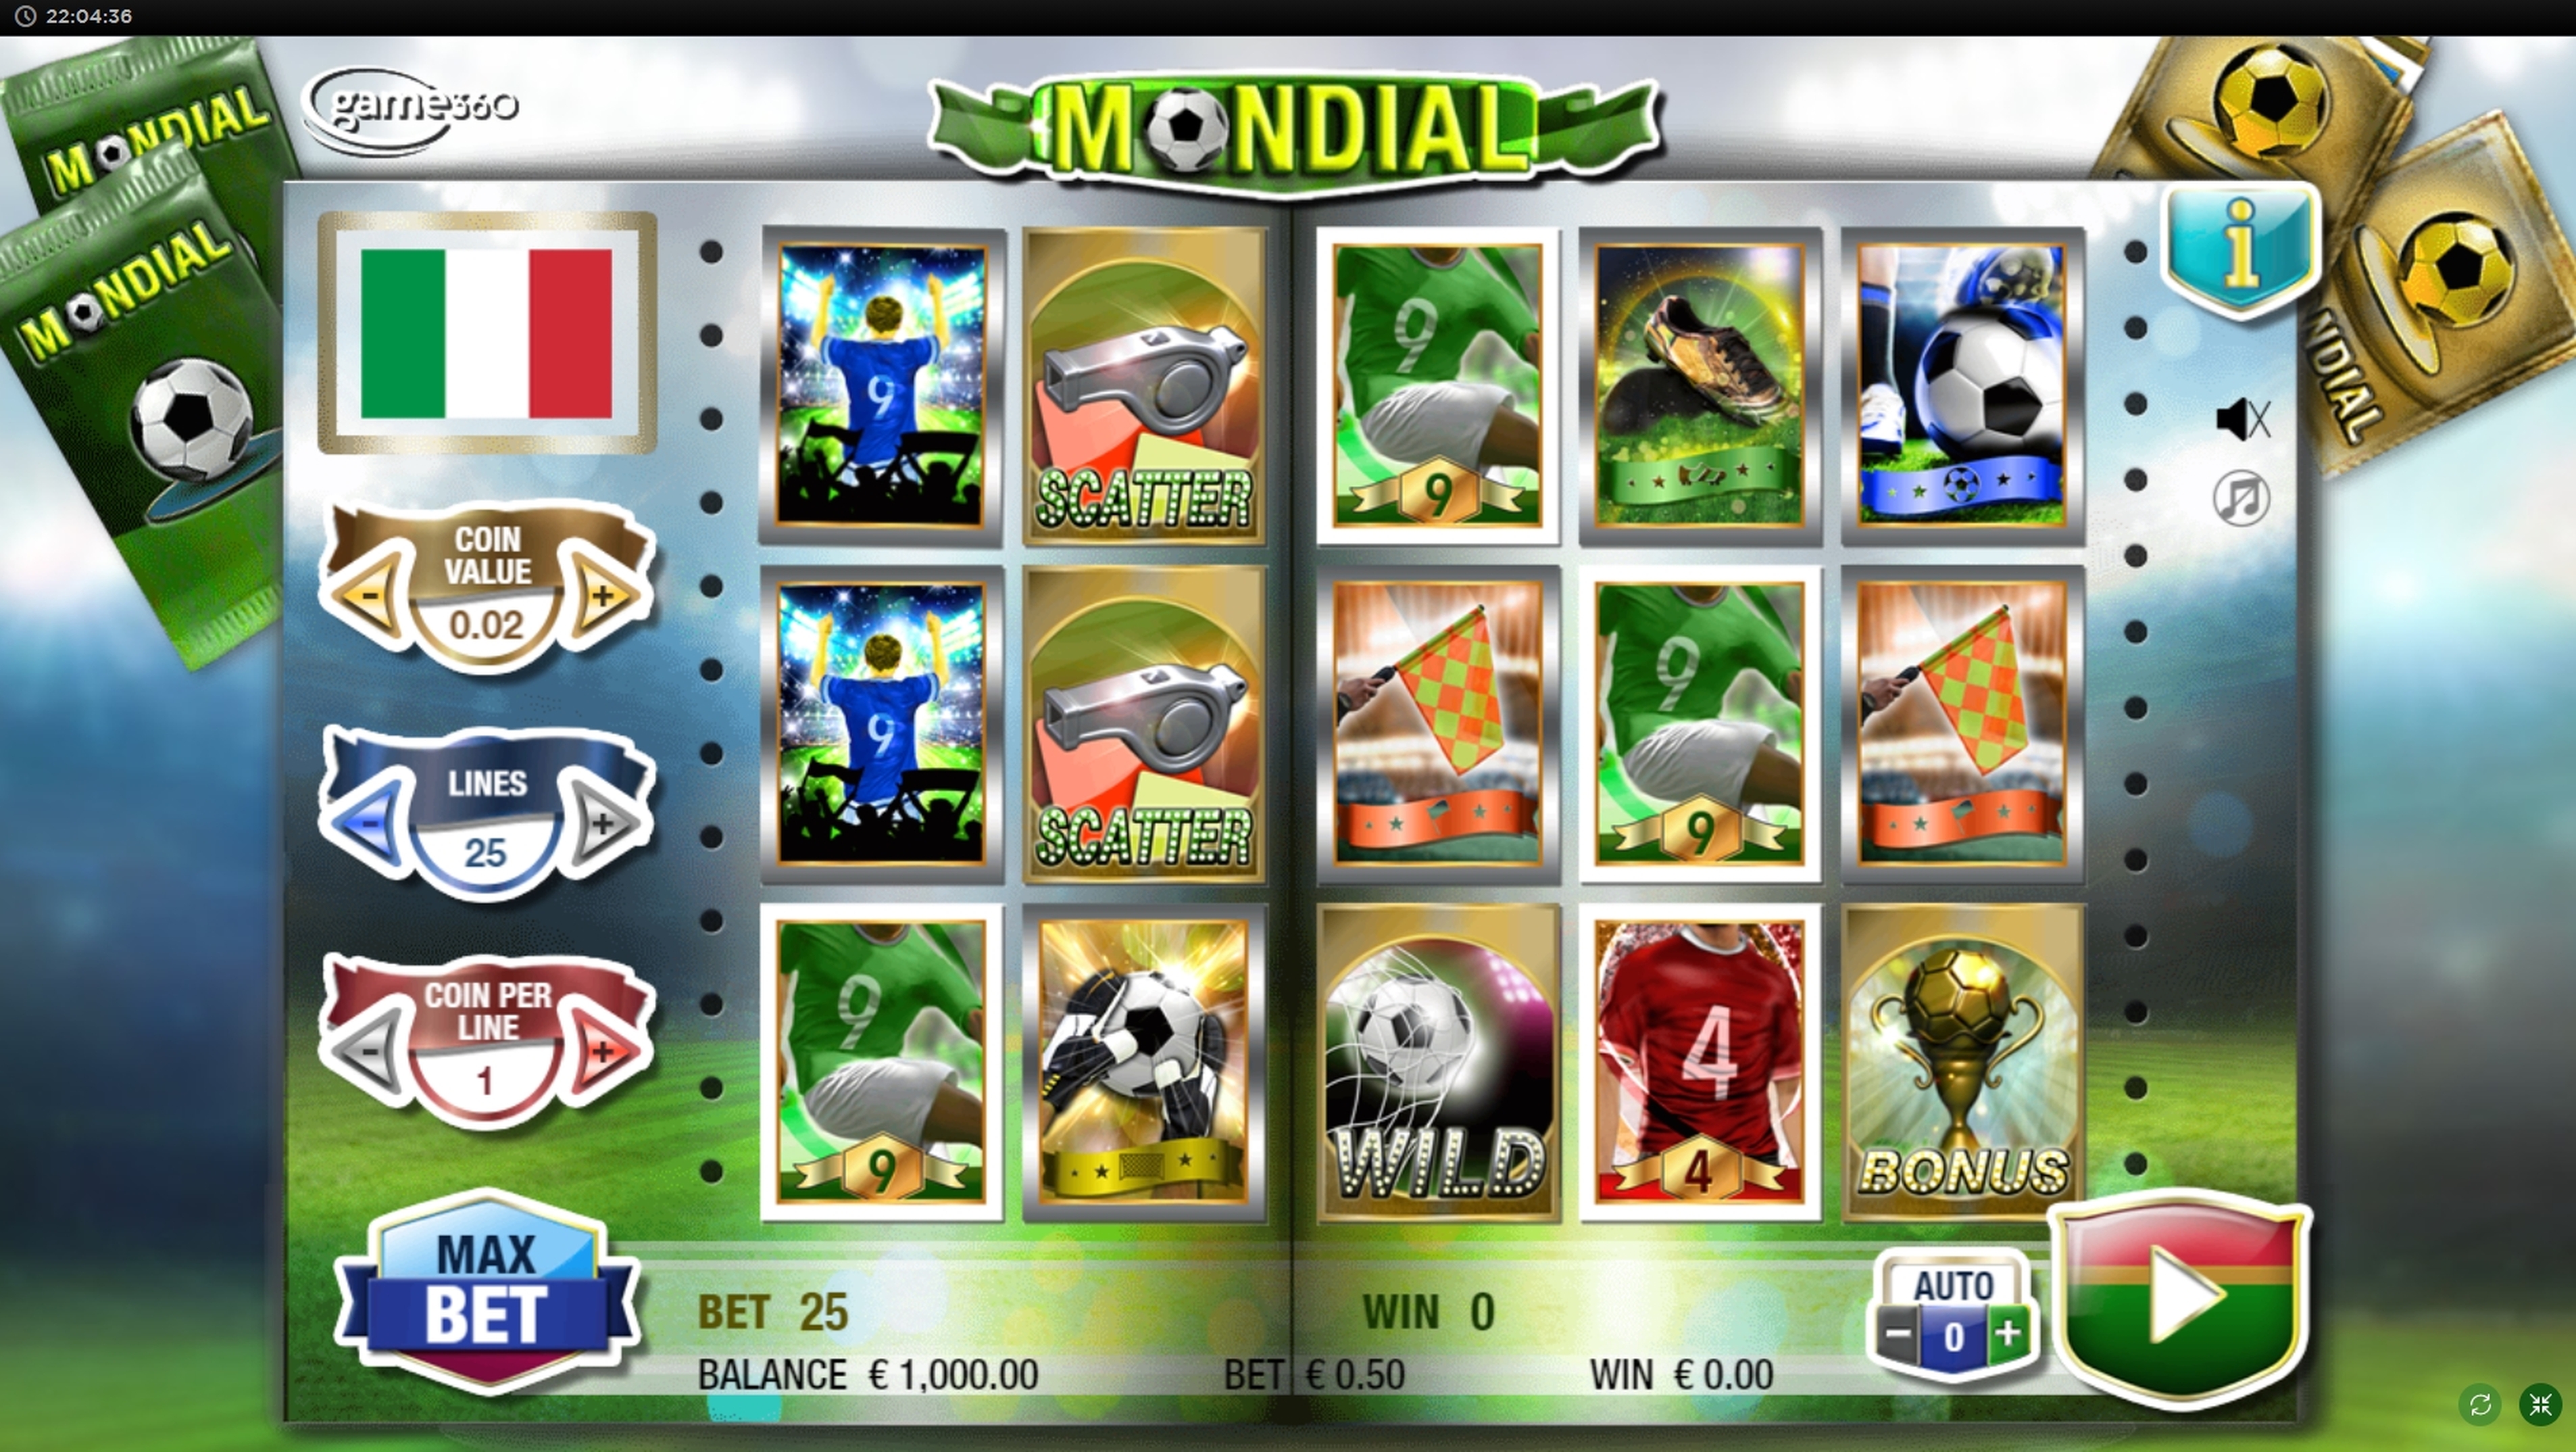 Reels in Mondial Slot Game by Game360